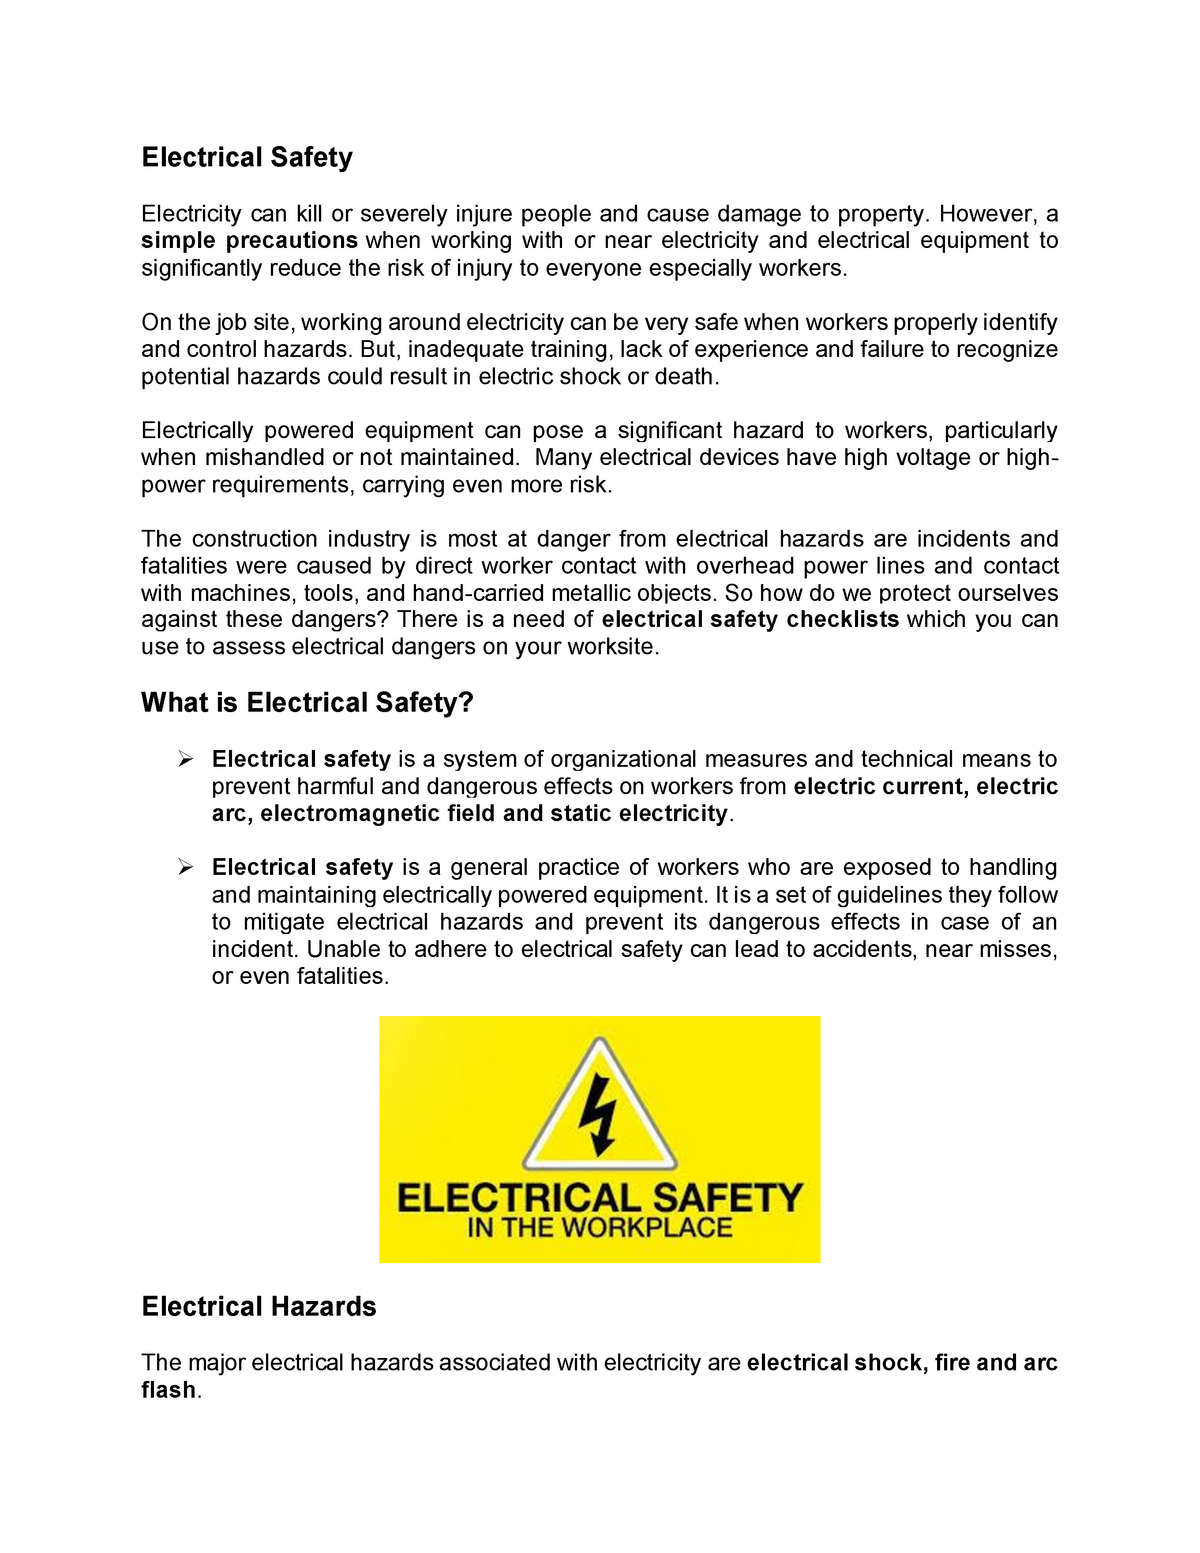 Causes of electrical accidents